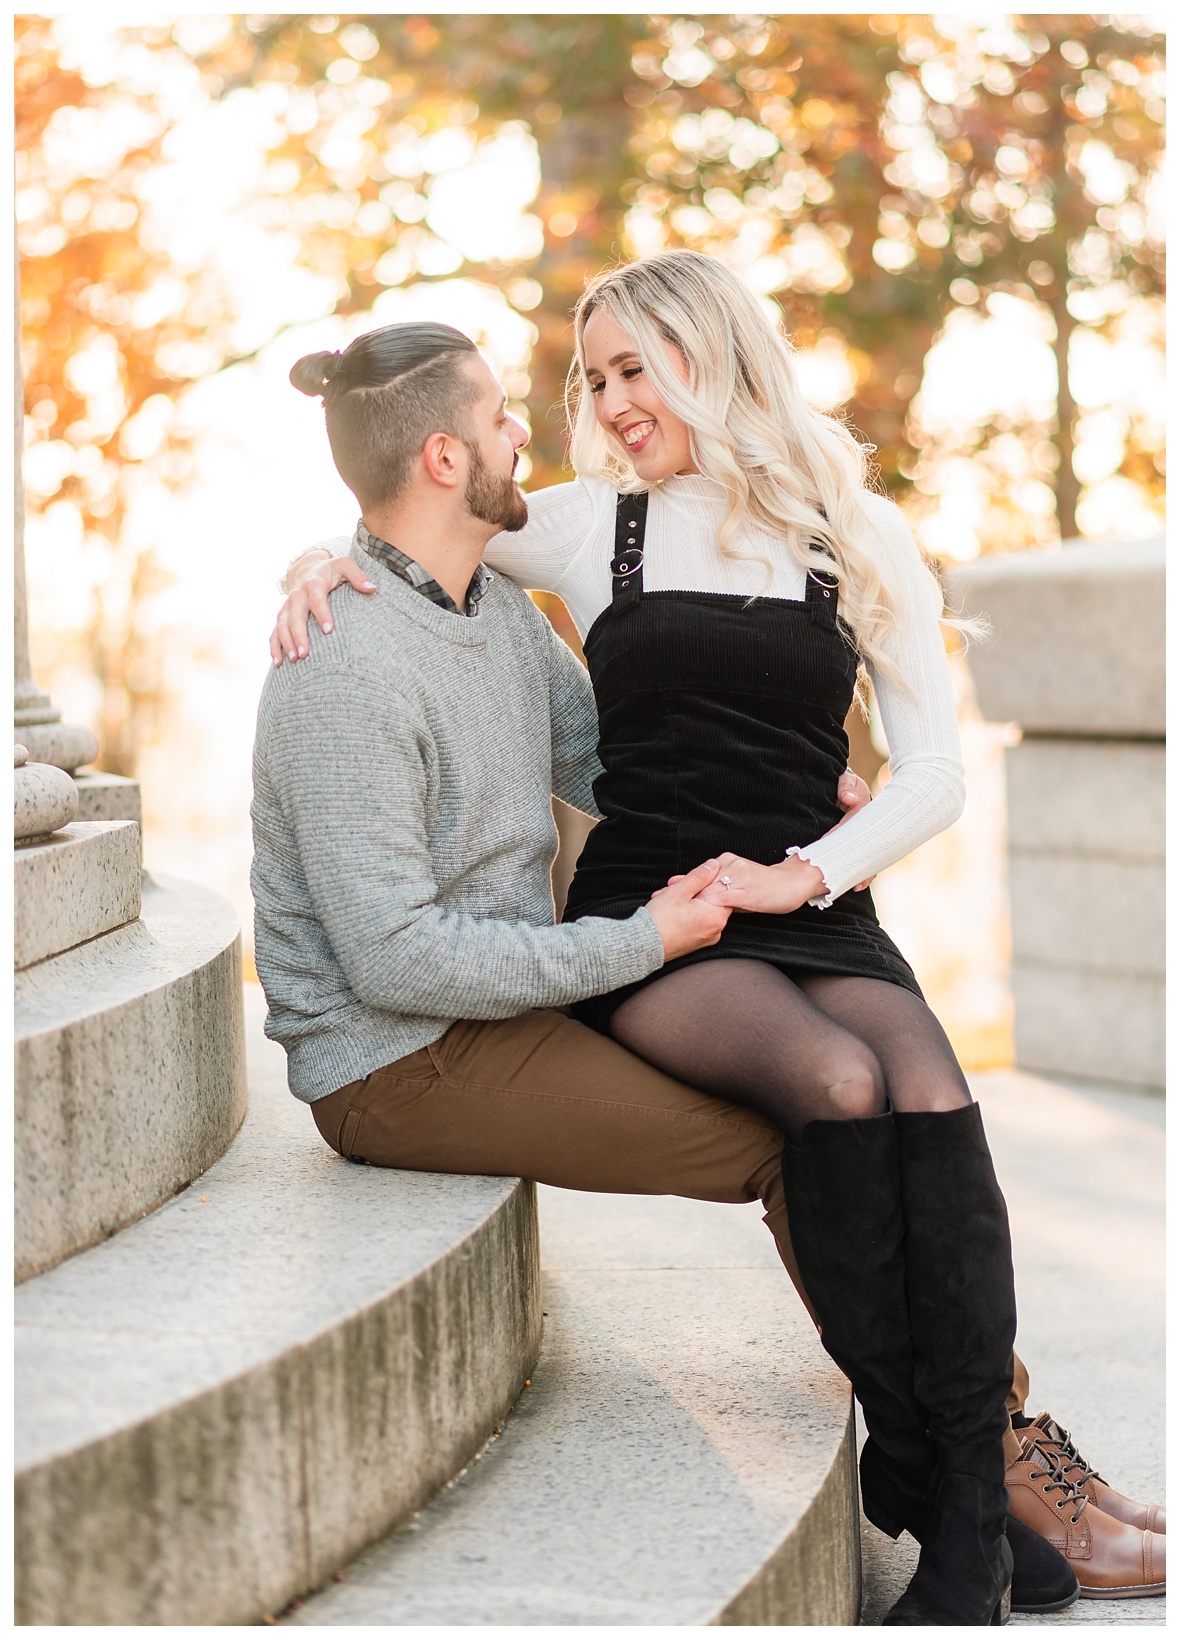 engagement photo ideas for fall